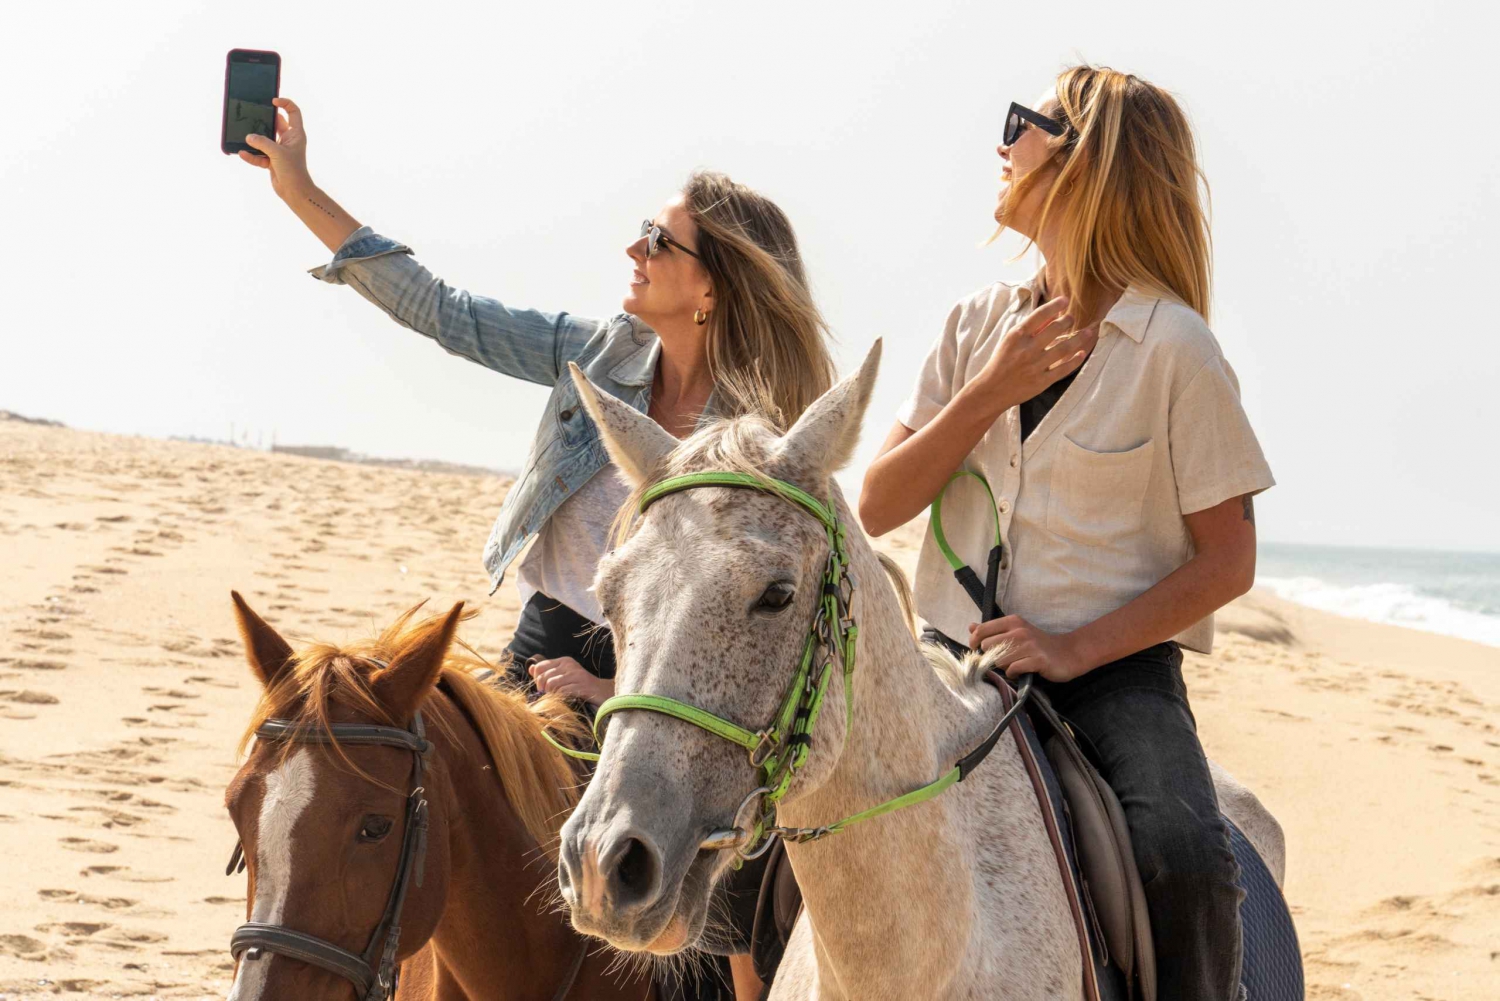 From Lisbon: Comporta and Setúbal Trip with Horseback Riding